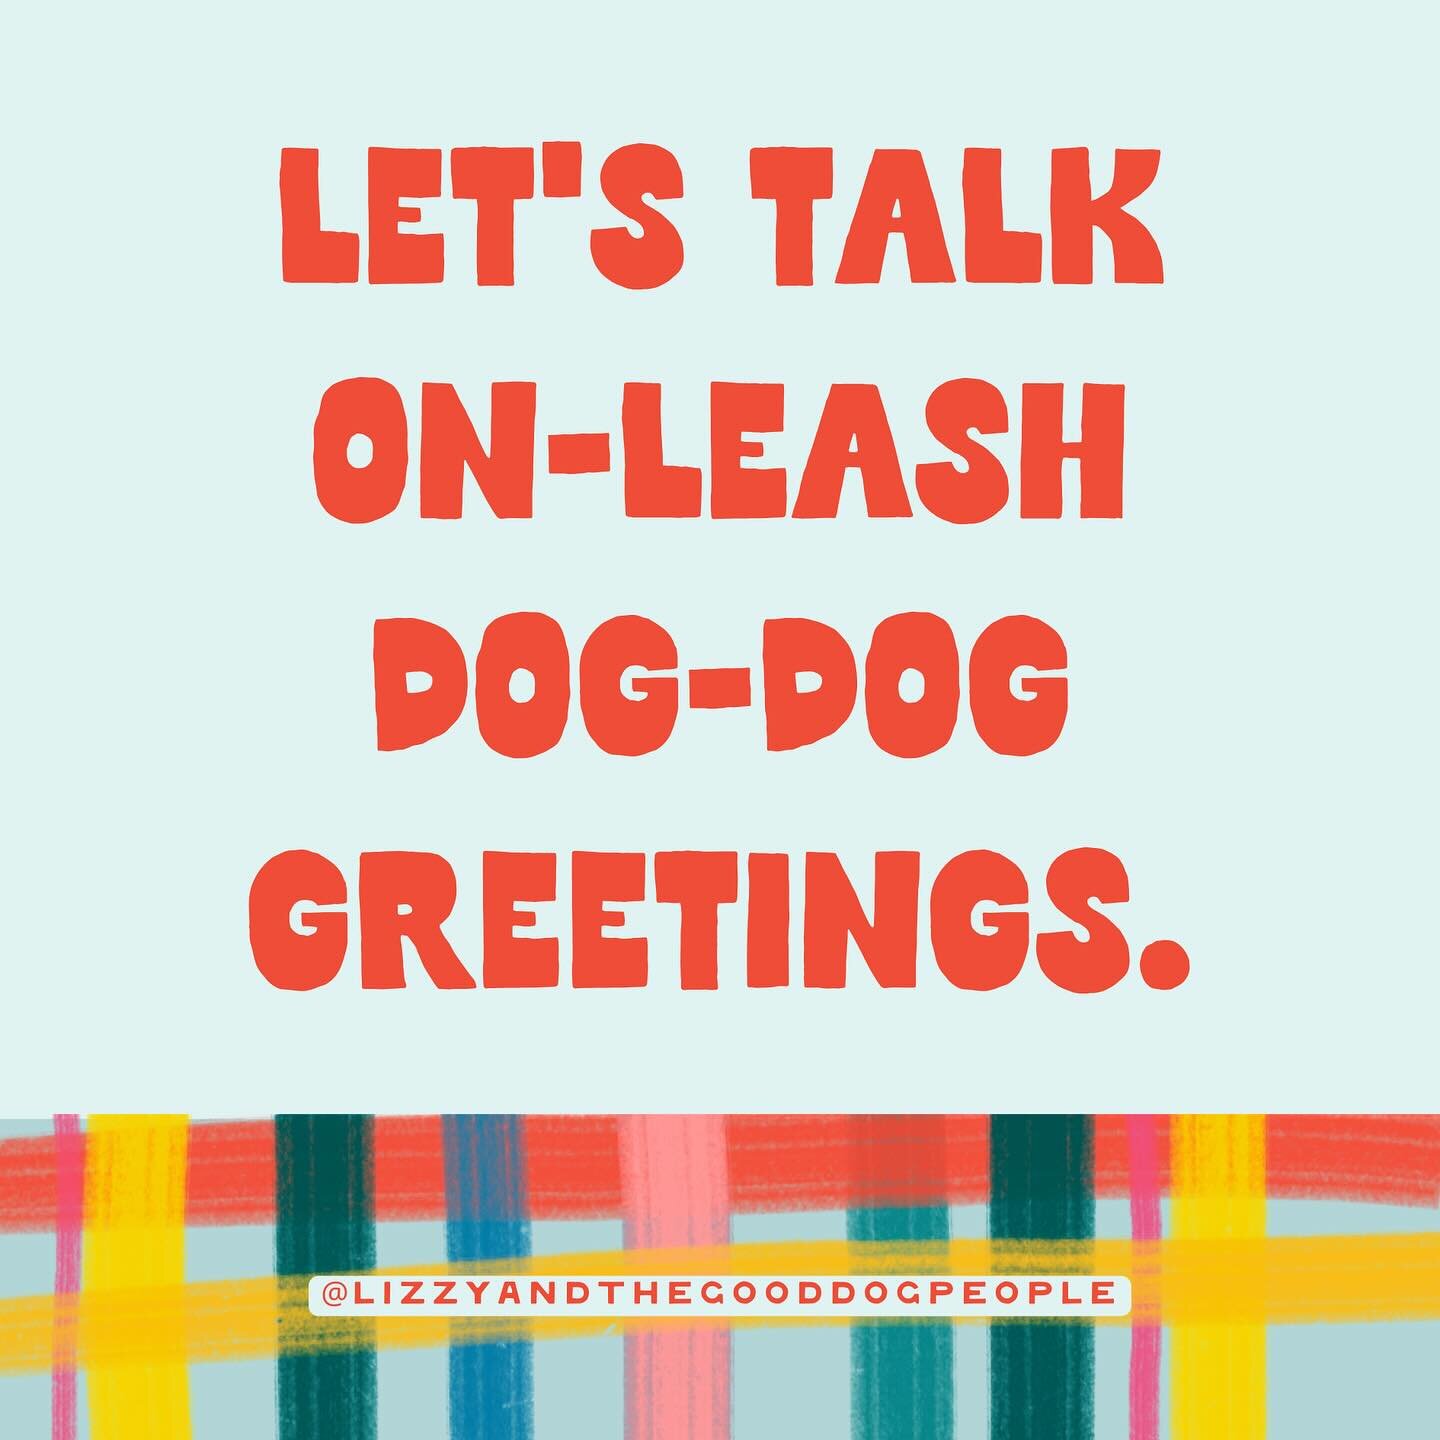 On-leash dog greetings can go wrong quickly! Barrier frustration, missed body language, and other factors make on-leash dog interactions dicey. My bias is to avoid these types of interactions! If you get stuck, try this &ldquo;three-second&rdquo; app